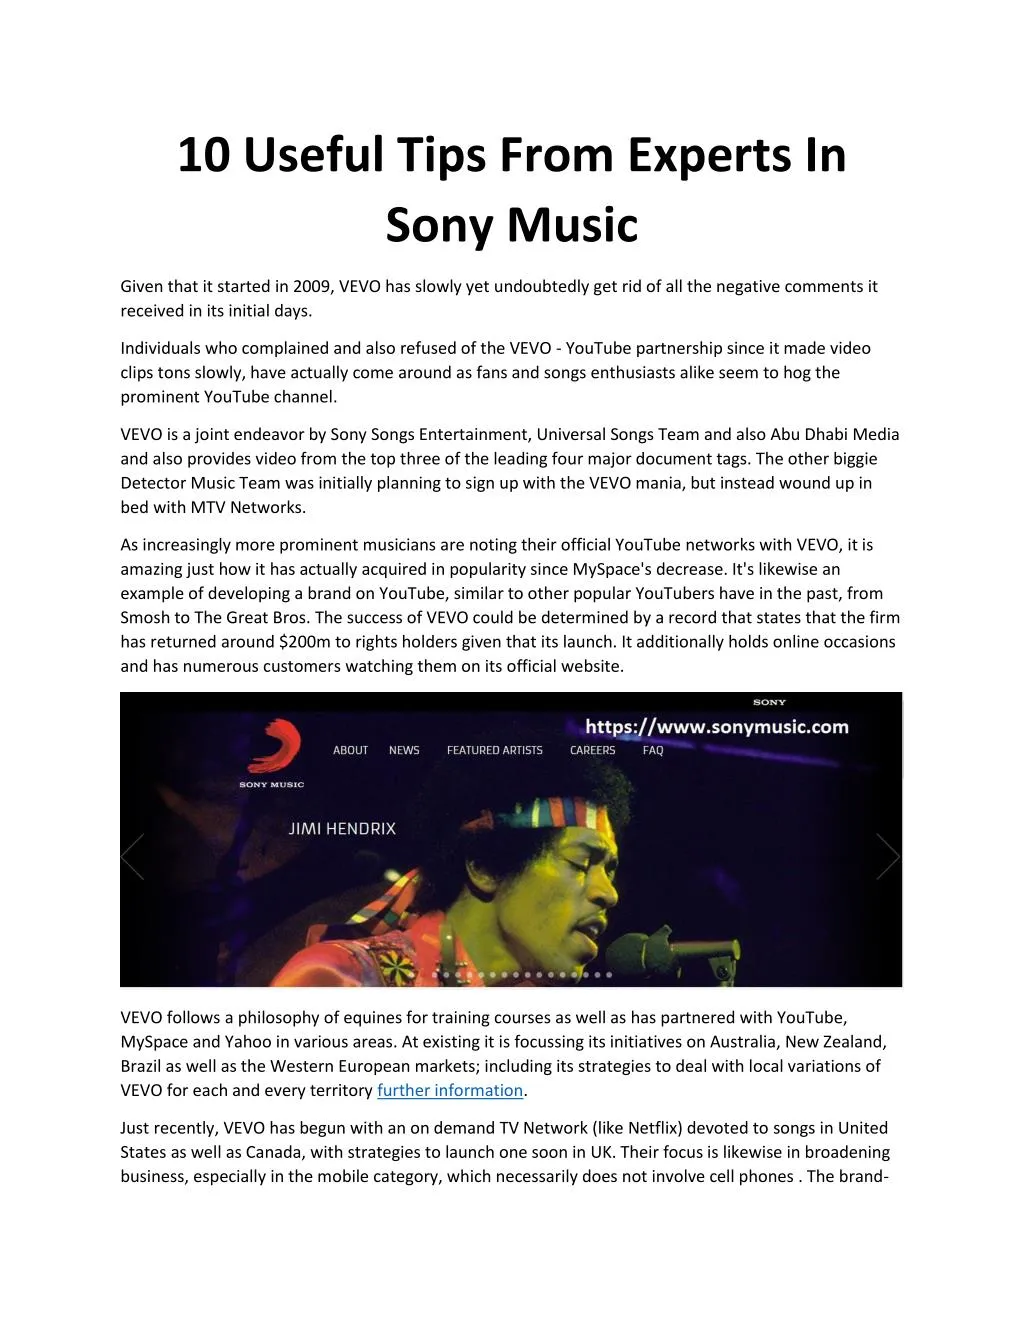 10 useful tips from experts in sony music